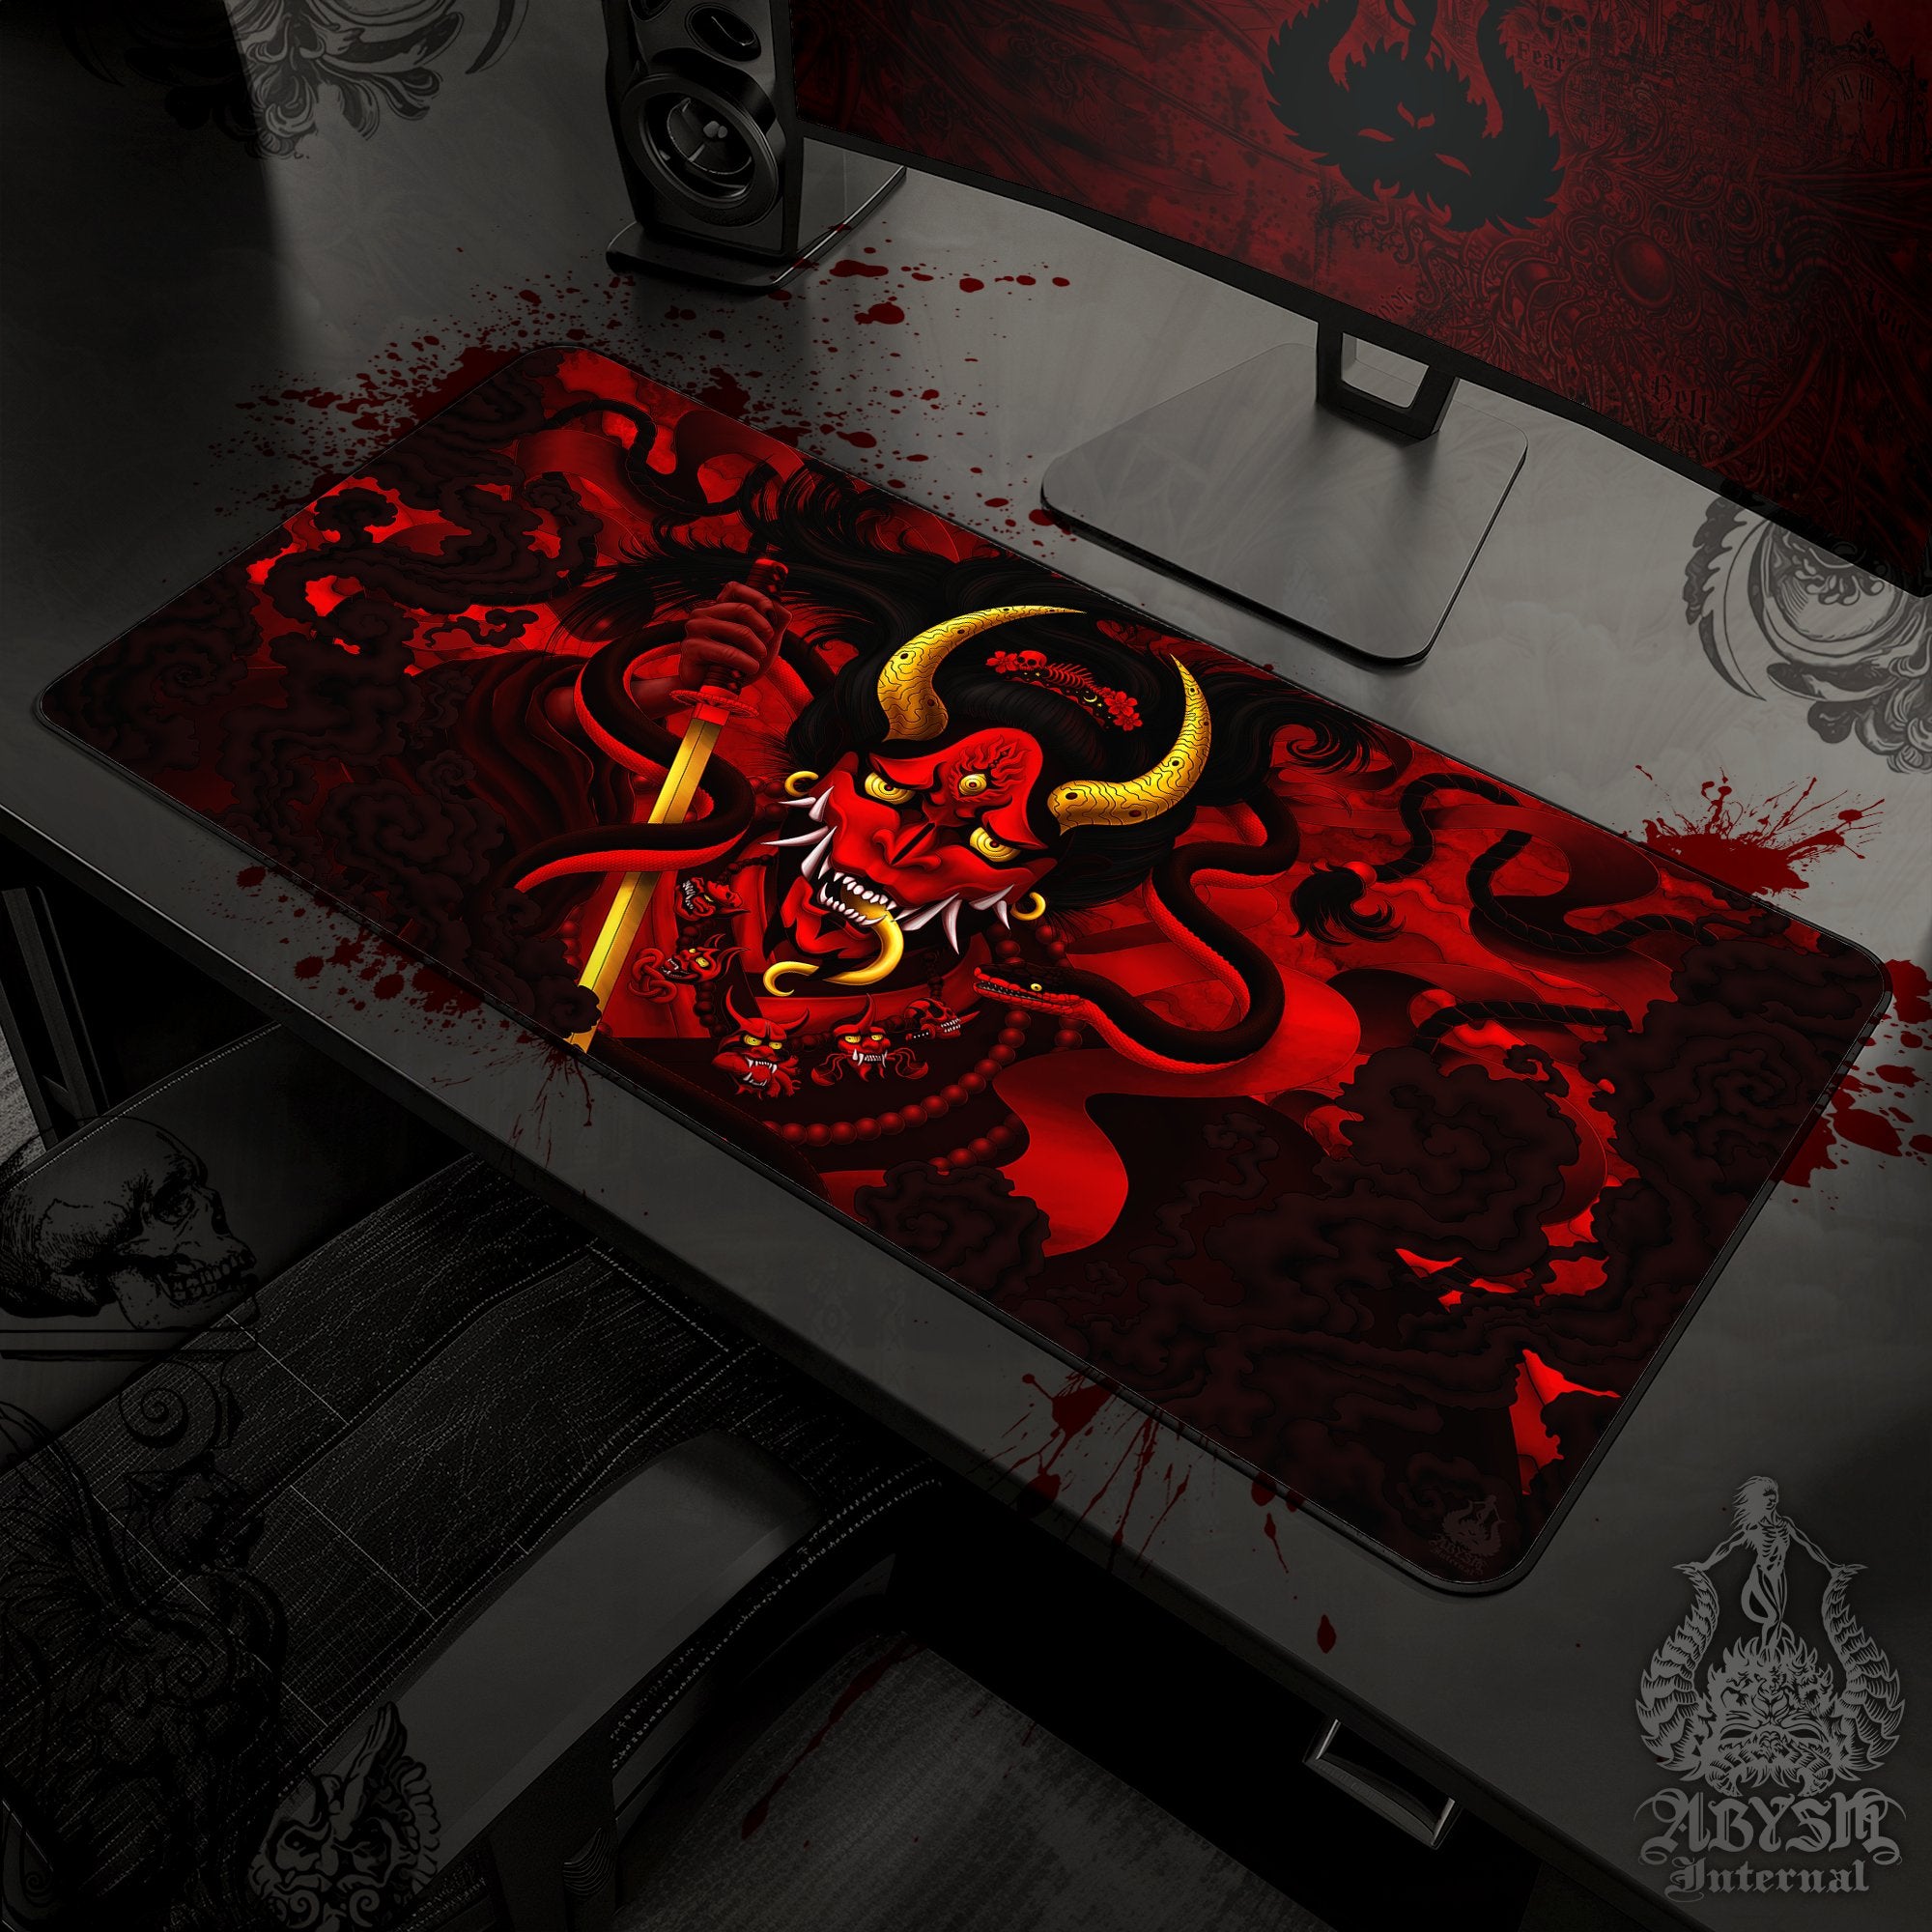 Japanese Demon Mouse Pad, Hannya Gaming Desk Mat, Youkai Workpad, Bloody Red Table Protector Cover, Fantasy Anime and Manga Art Print - Black Snake - Abysm Internal